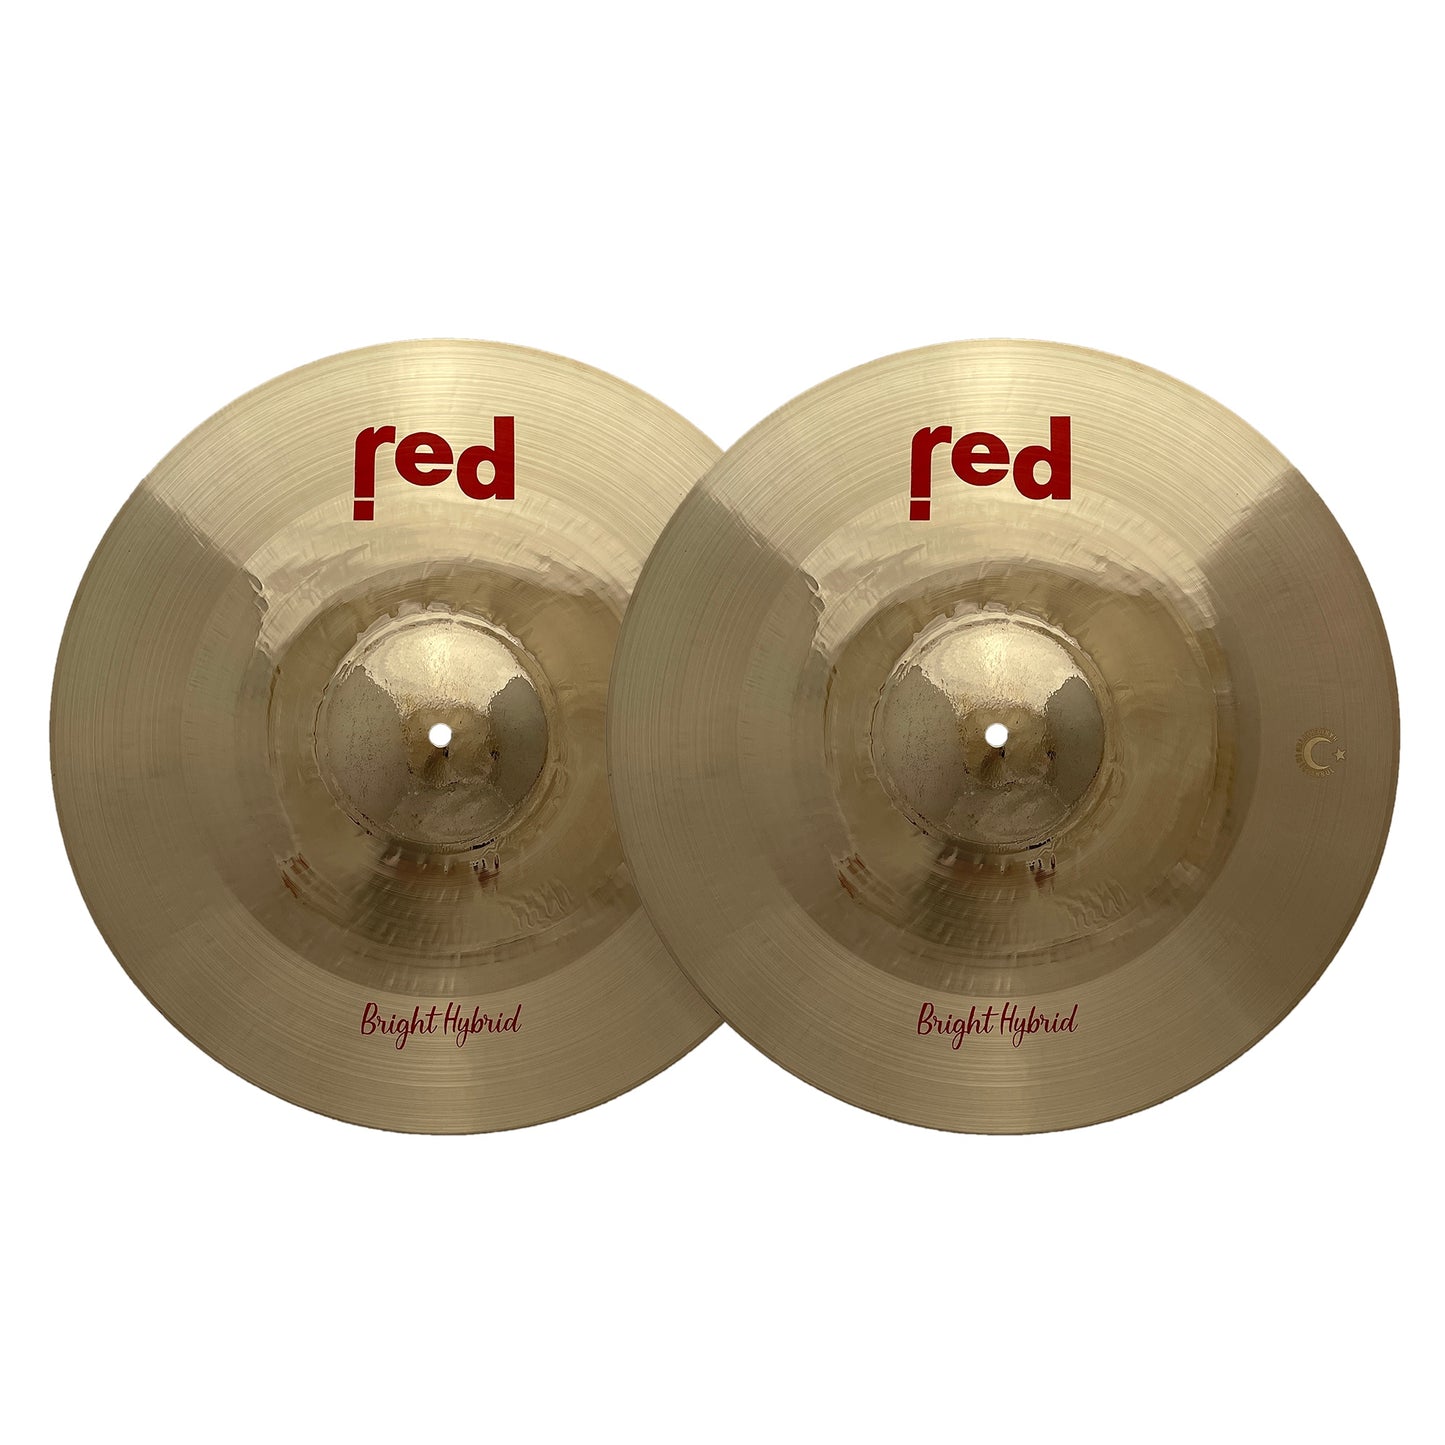 Red Cymbals Bright Hybrid Series Hi-Hat Cymbals